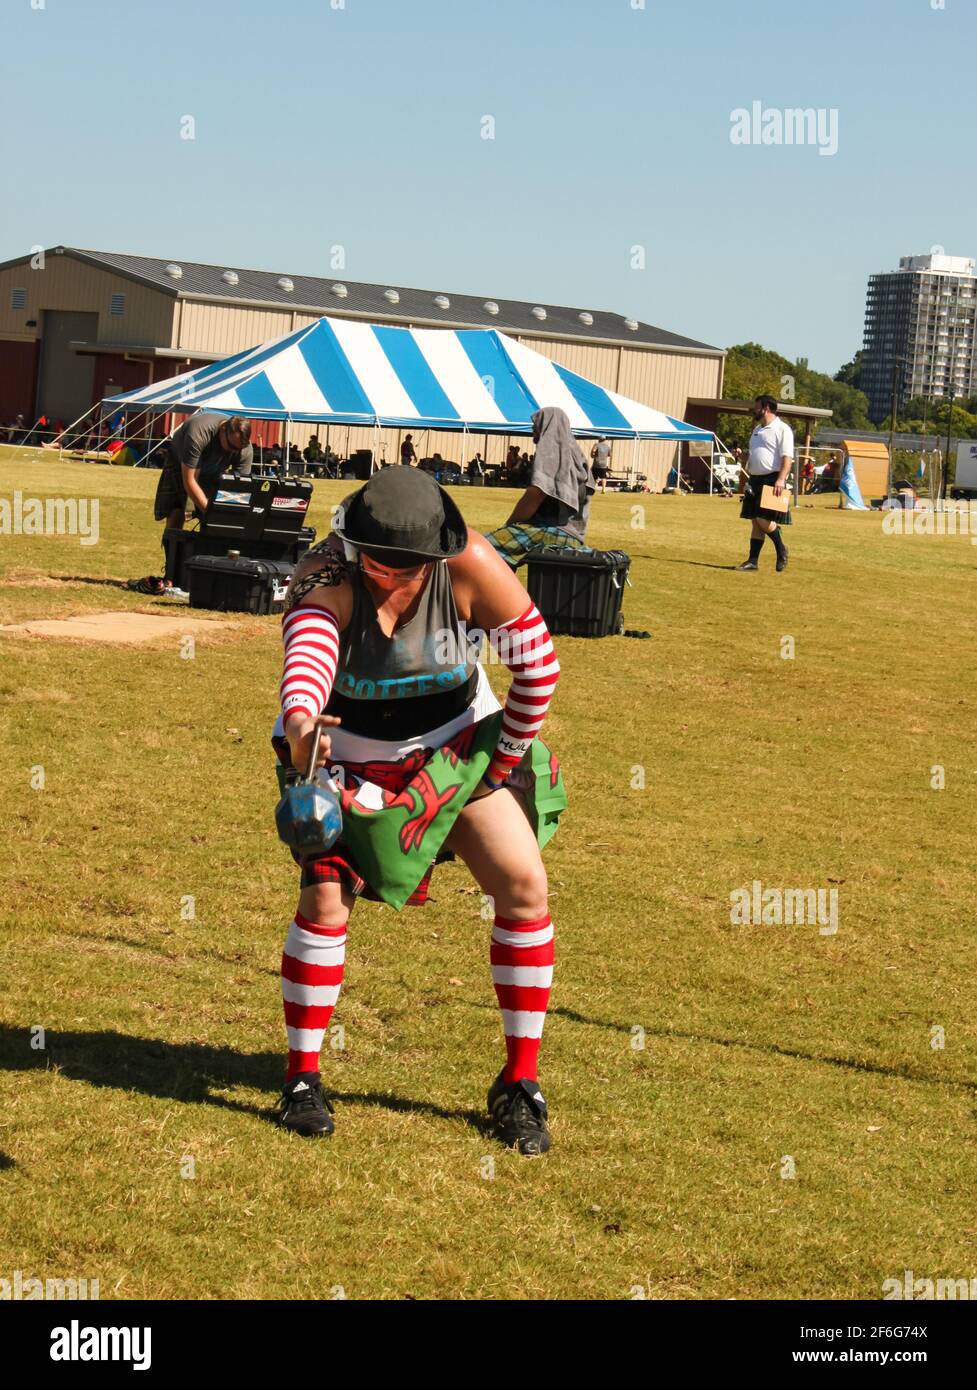 Woman competing in Weight of height strength test at Scottish Highland games getting ready to throw weight over high bar Tulsa Oklahoma USA circa 9 - Stock Photo